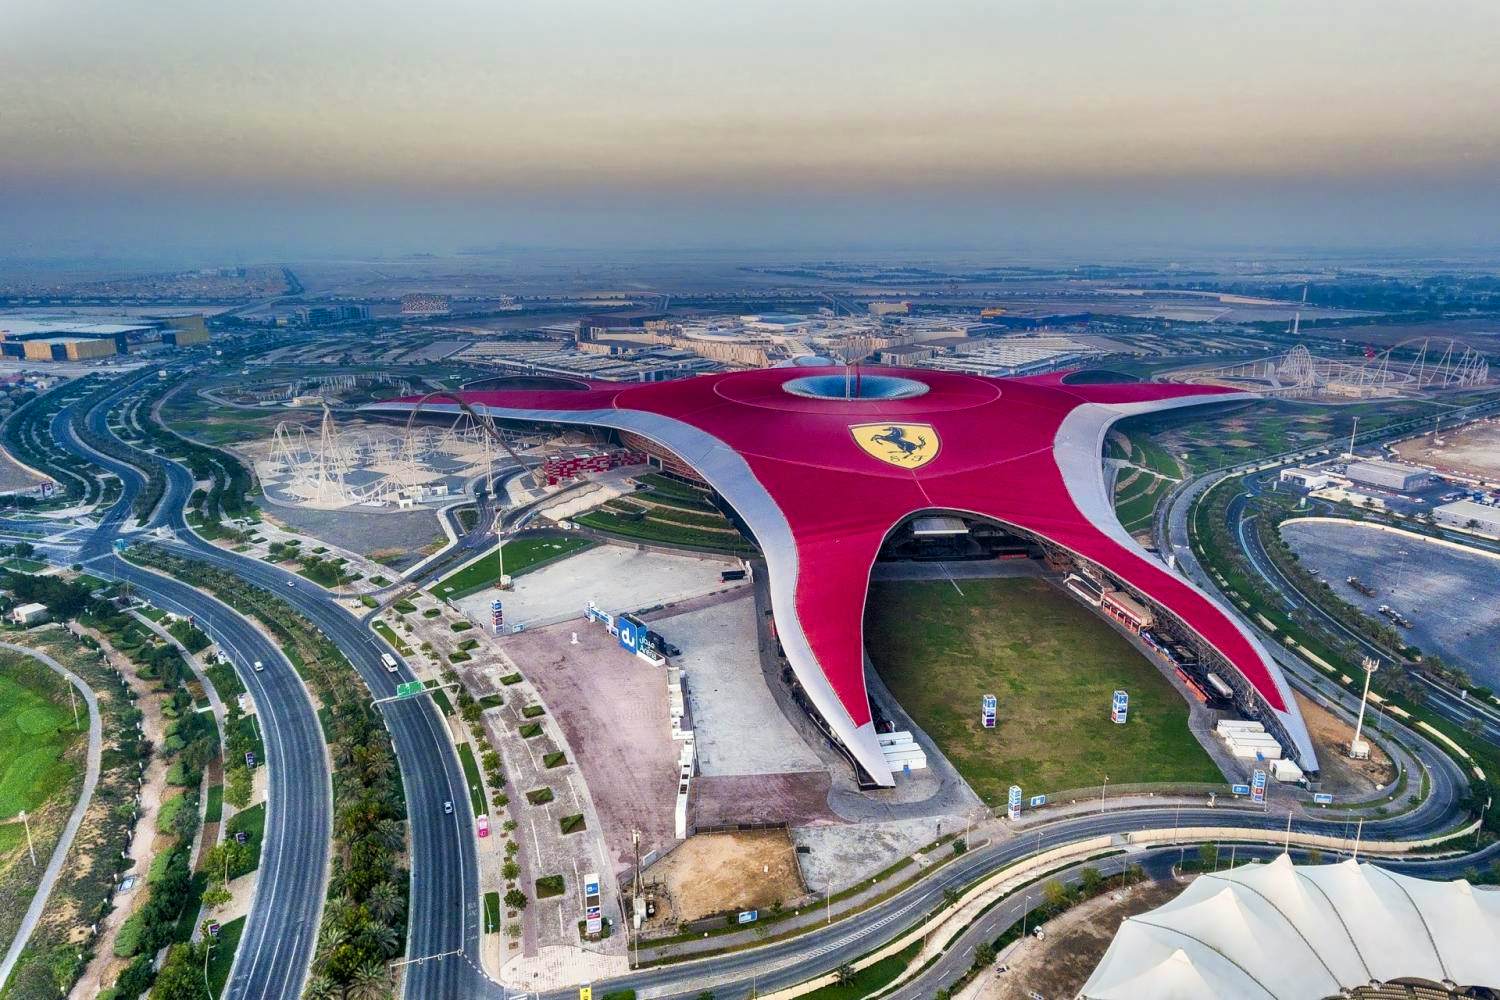 Standard Abu Dhabi City Tour with Yas Island (1 Day 1 Park) Ferrari World OR Warner Bros OR Yas Water World on Shared Basis ( Not operational - Friday)